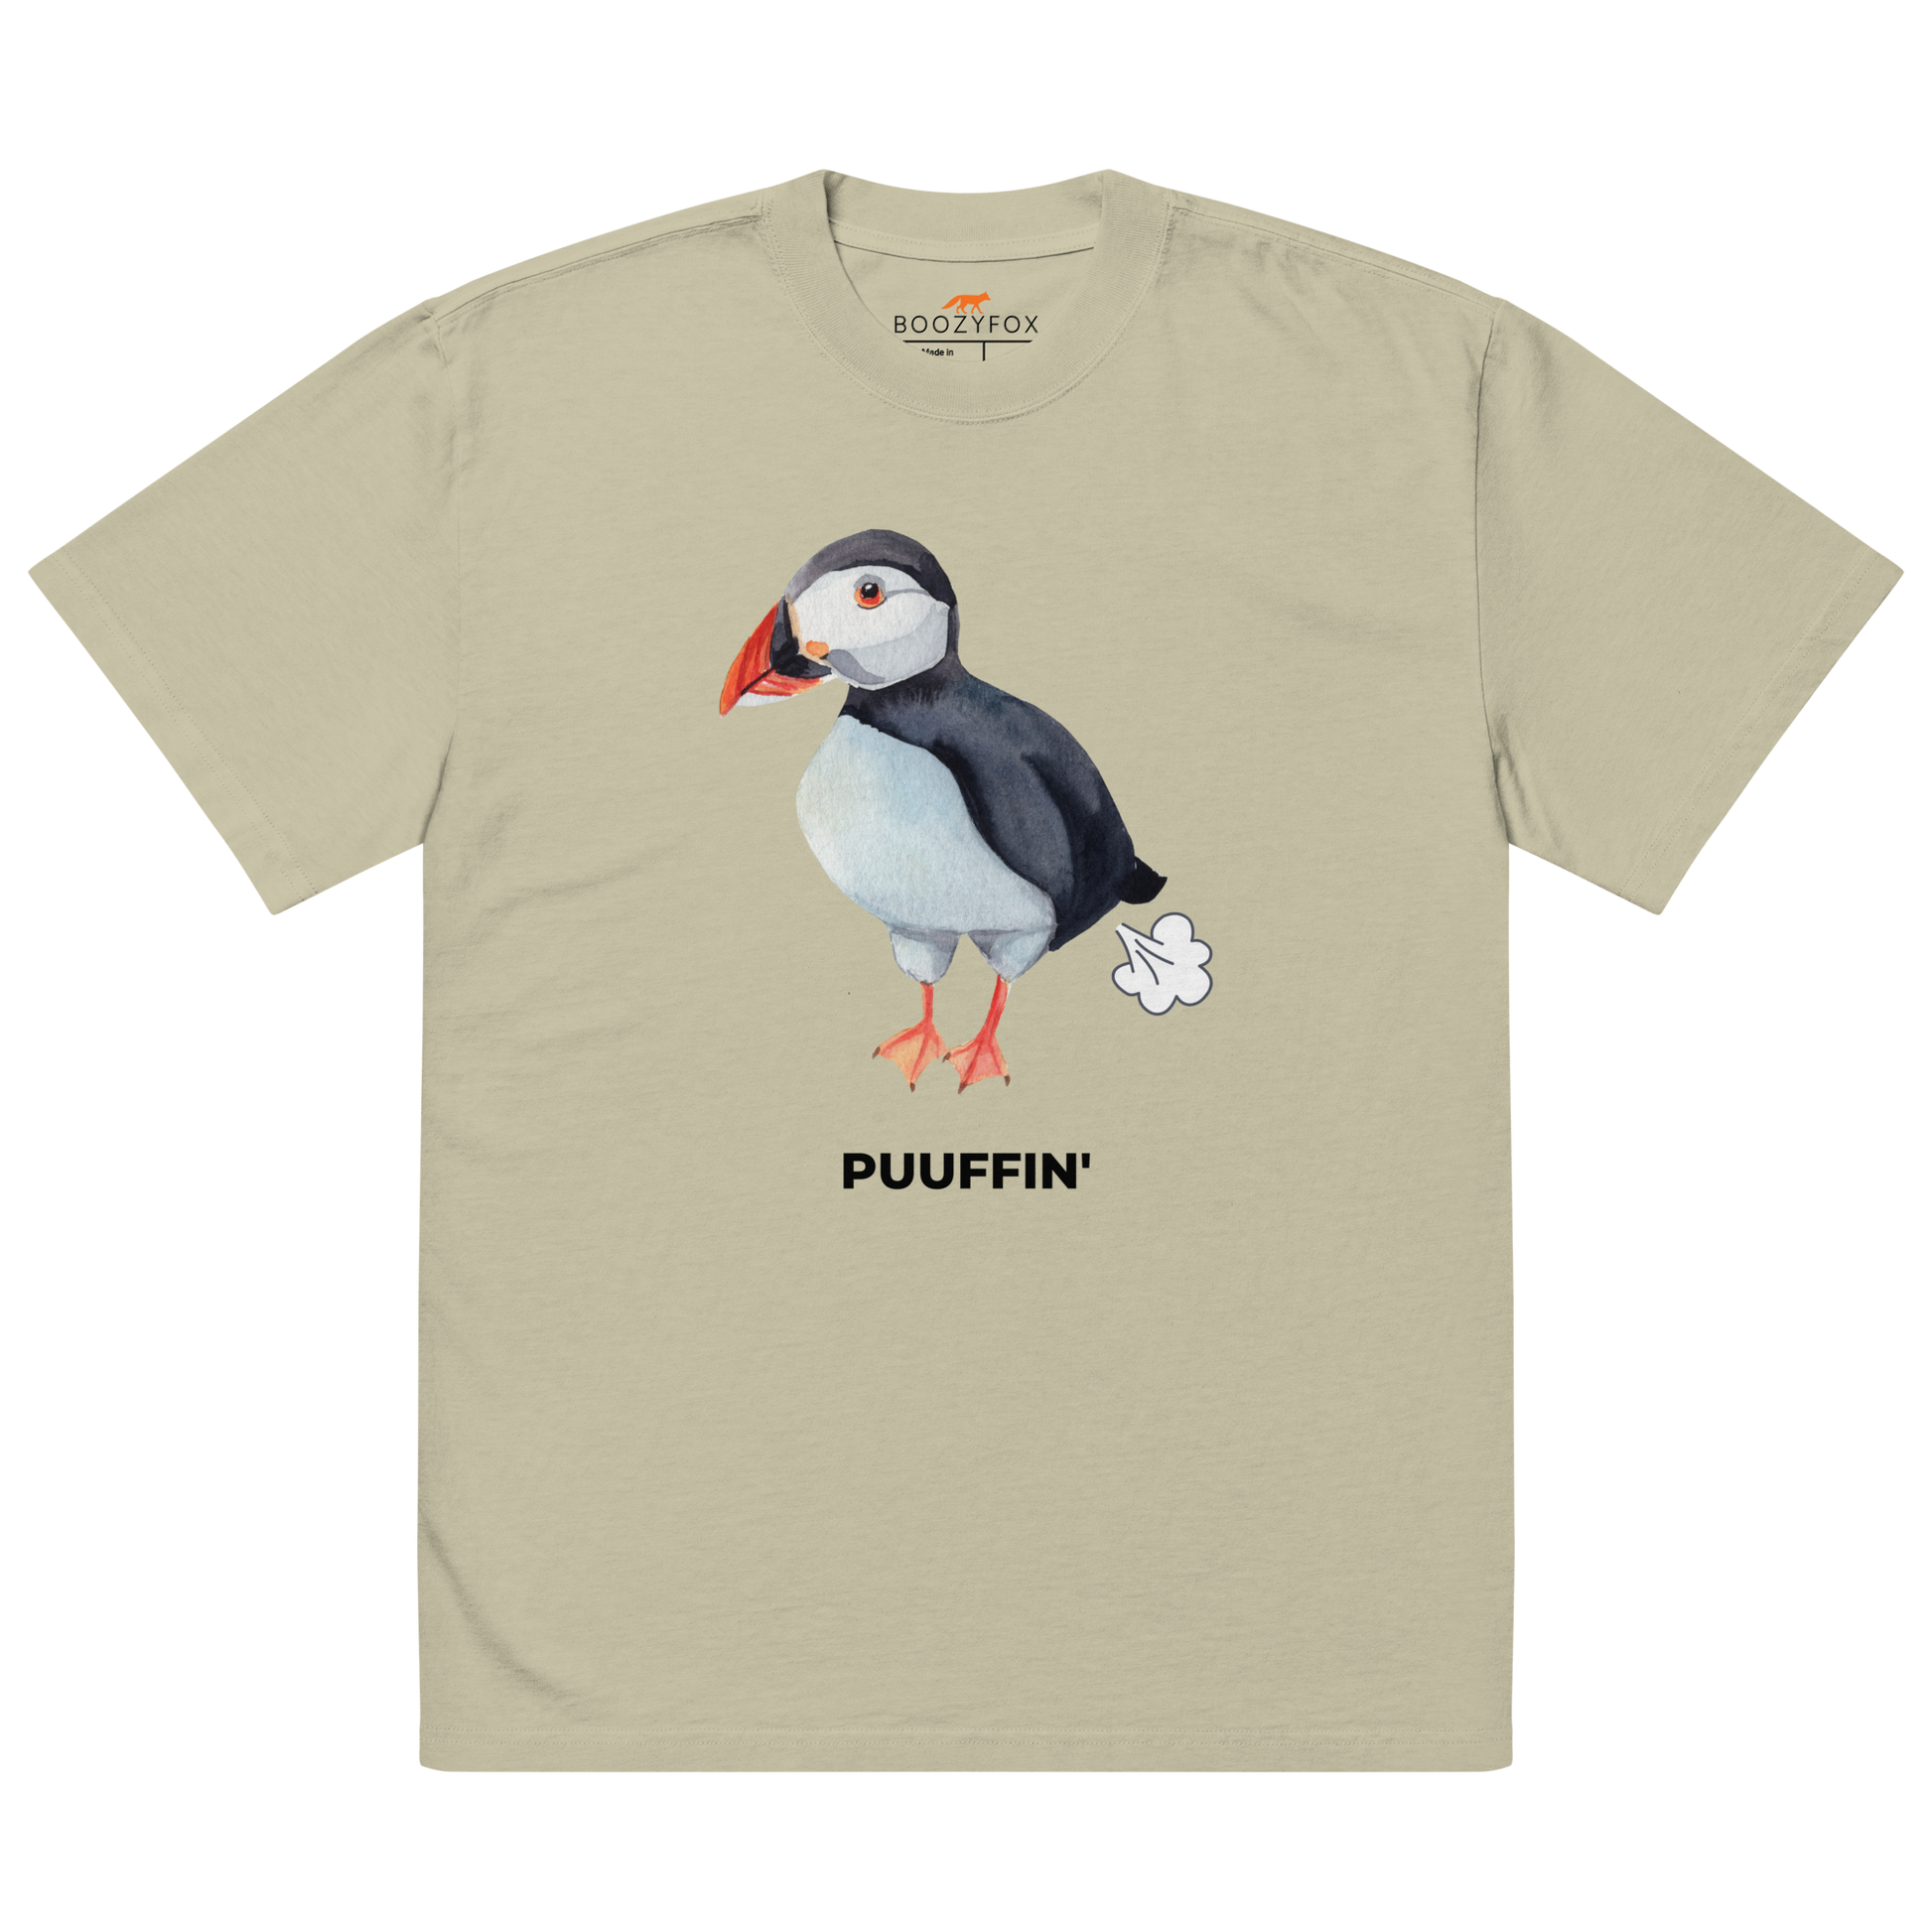 Faded Eucalyptus Puffin Oversized T-Shirt featuring a comic Puuffin' graphic on the chest - Funny Graphic Puffin Oversized Tees - Boozy Fox